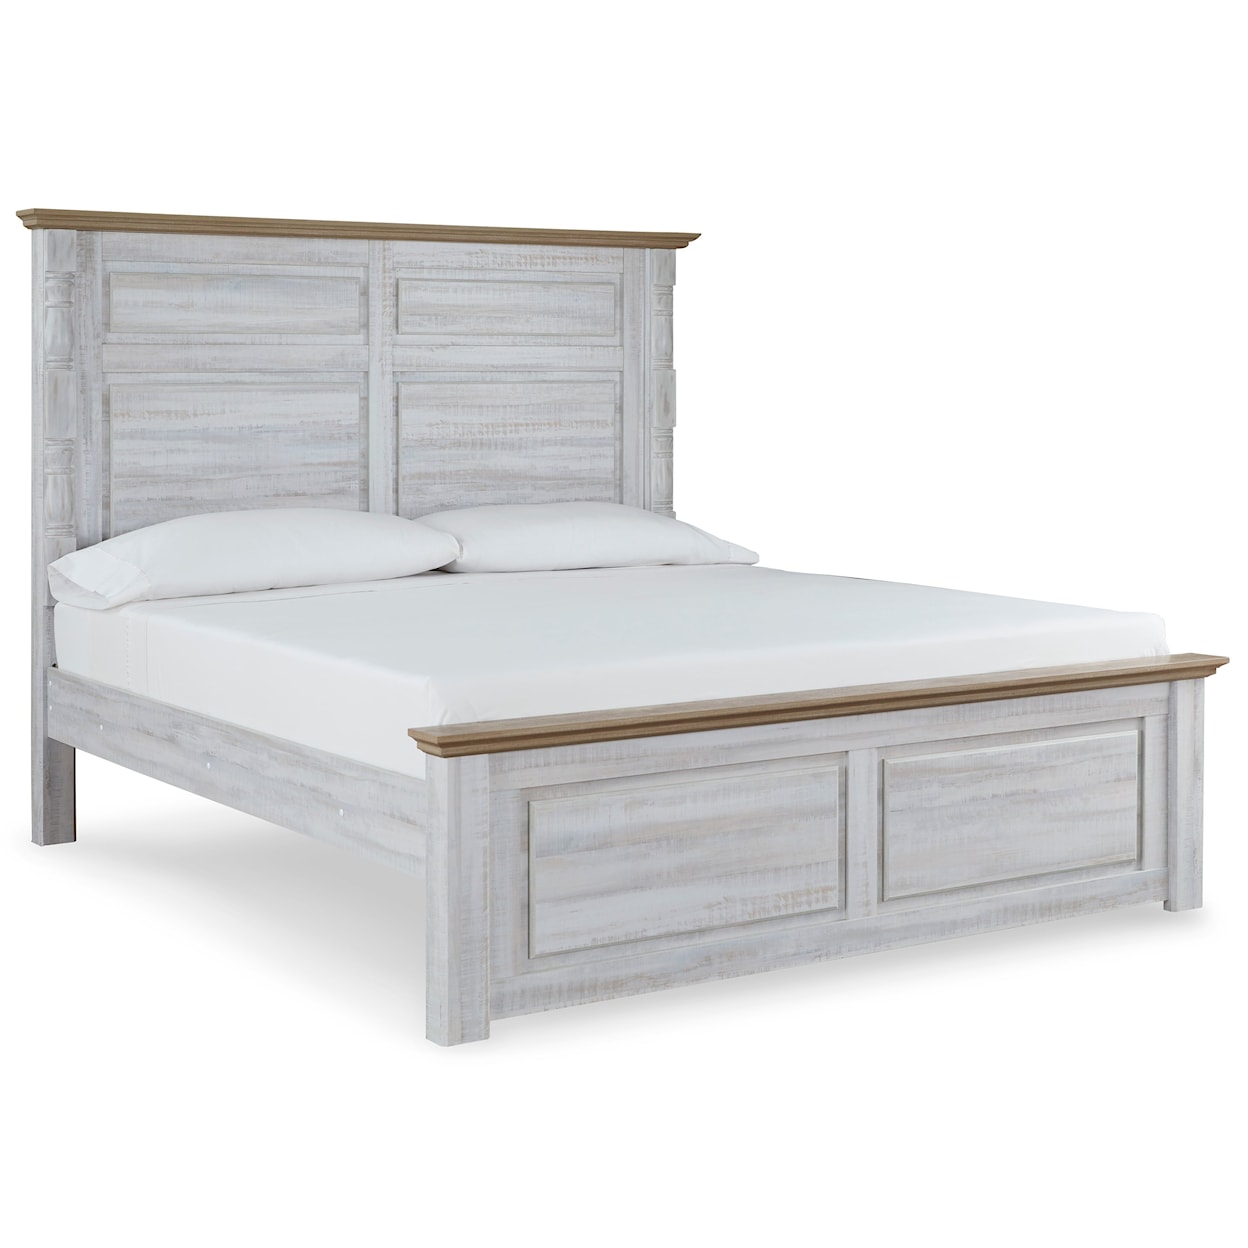 Signature Design by Ashley Furniture Haven Bay King Panel Bed